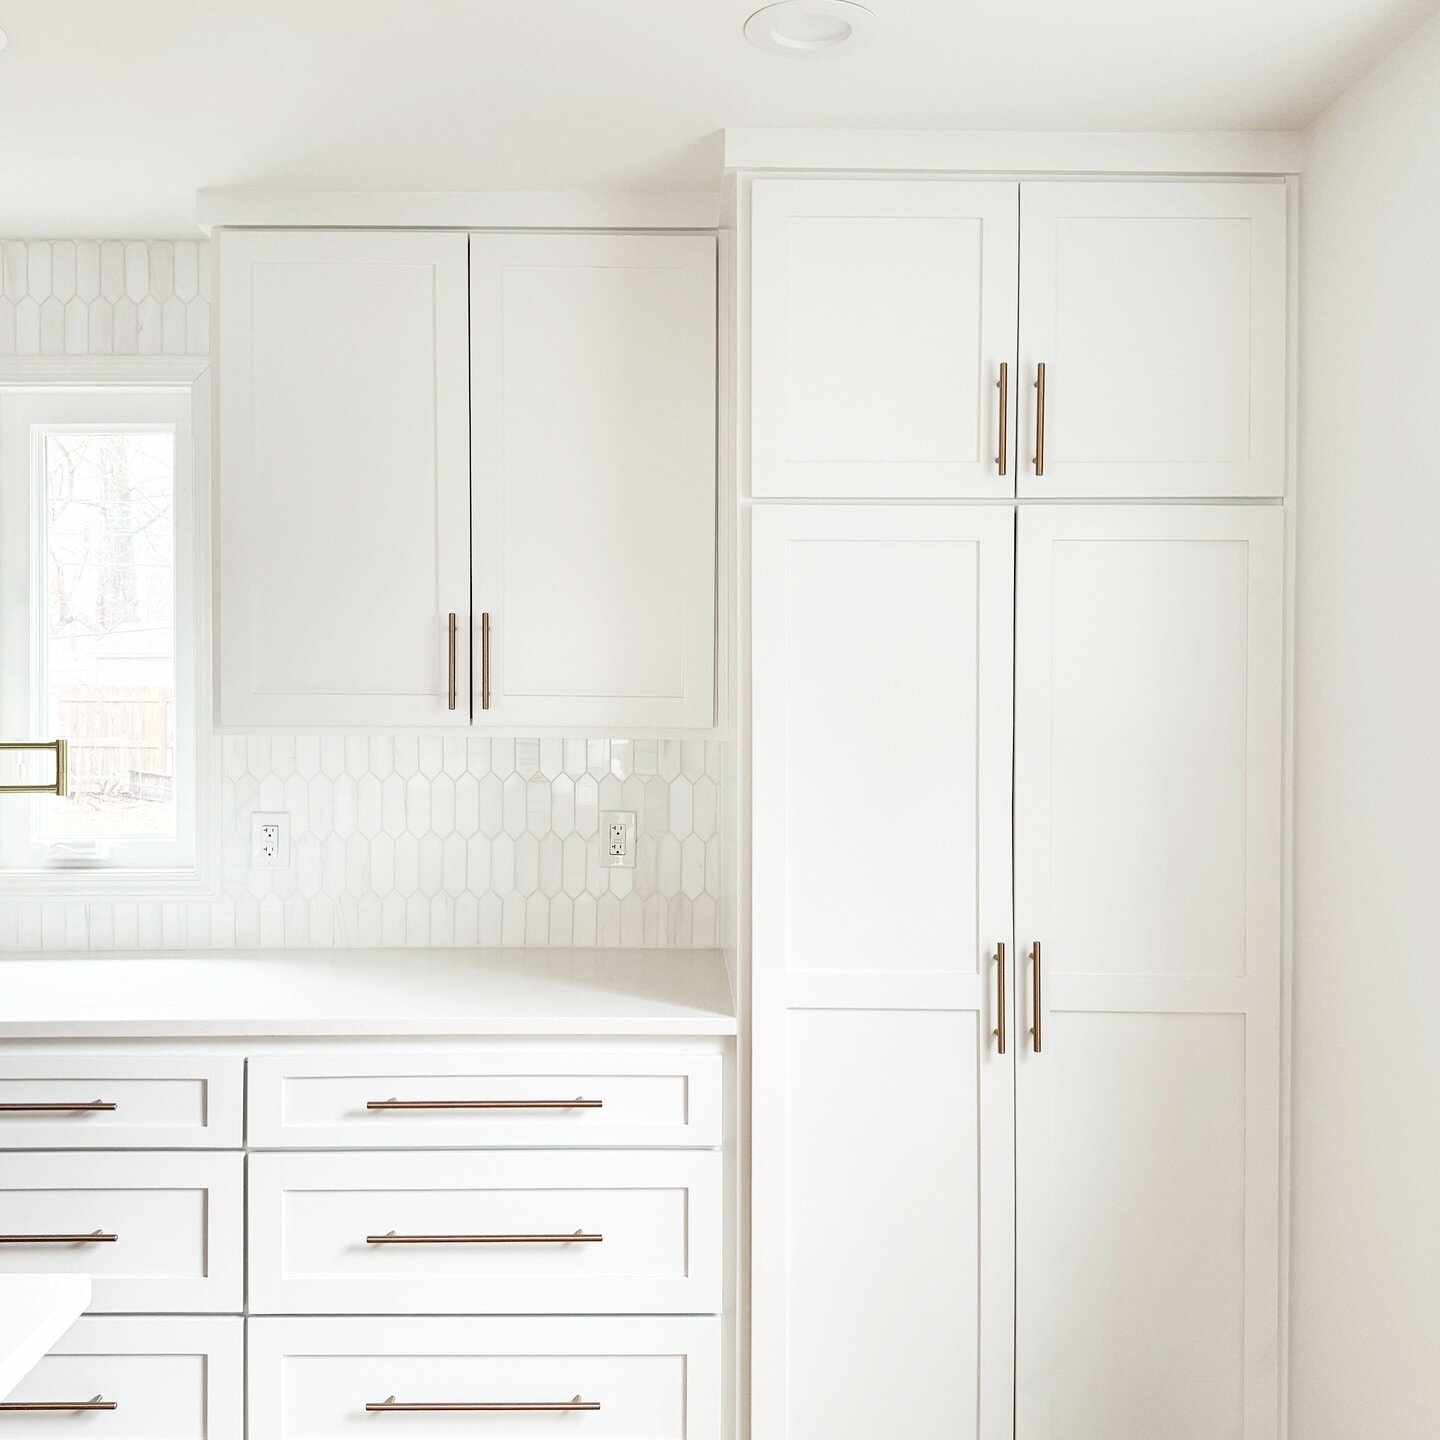 Soaking in the sunshine this week! ☀️ 

Here&rsquo;s another look at our prairie village renovation. Our kitchens aren&rsquo;t just about style &mdash; they&rsquo;re designed to be functional with deep drawers and floor-to-ceiling shelves.